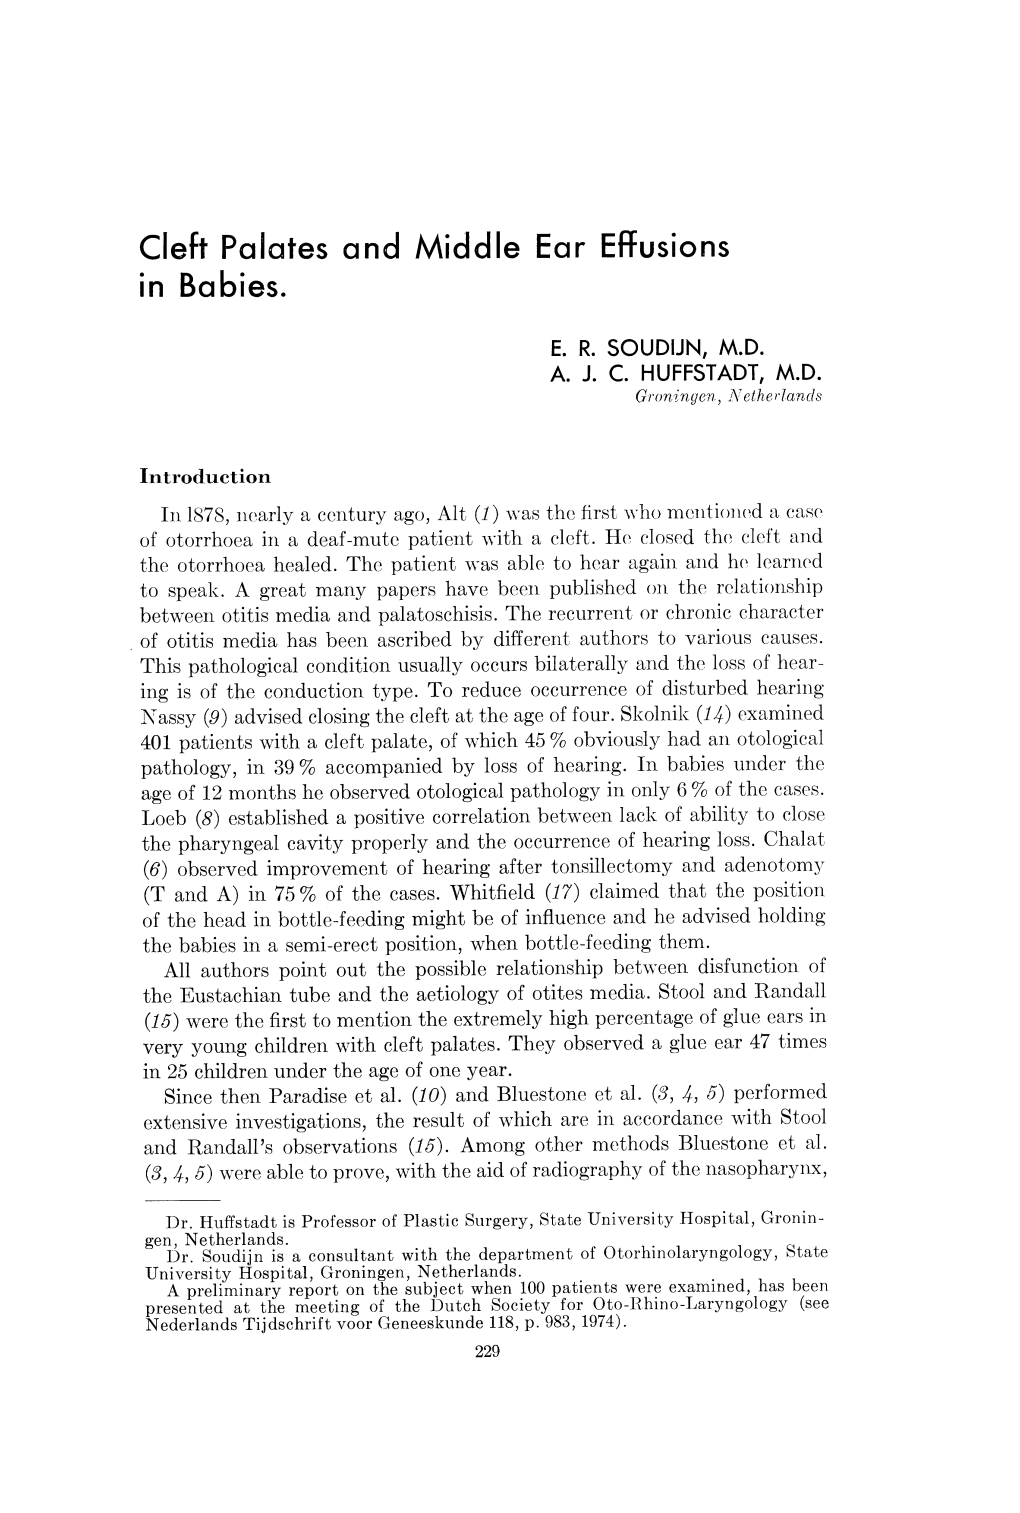 Cleft Palates and Middle Ear Effusions in Babies. R. SOUDIIN, M.D. J. C